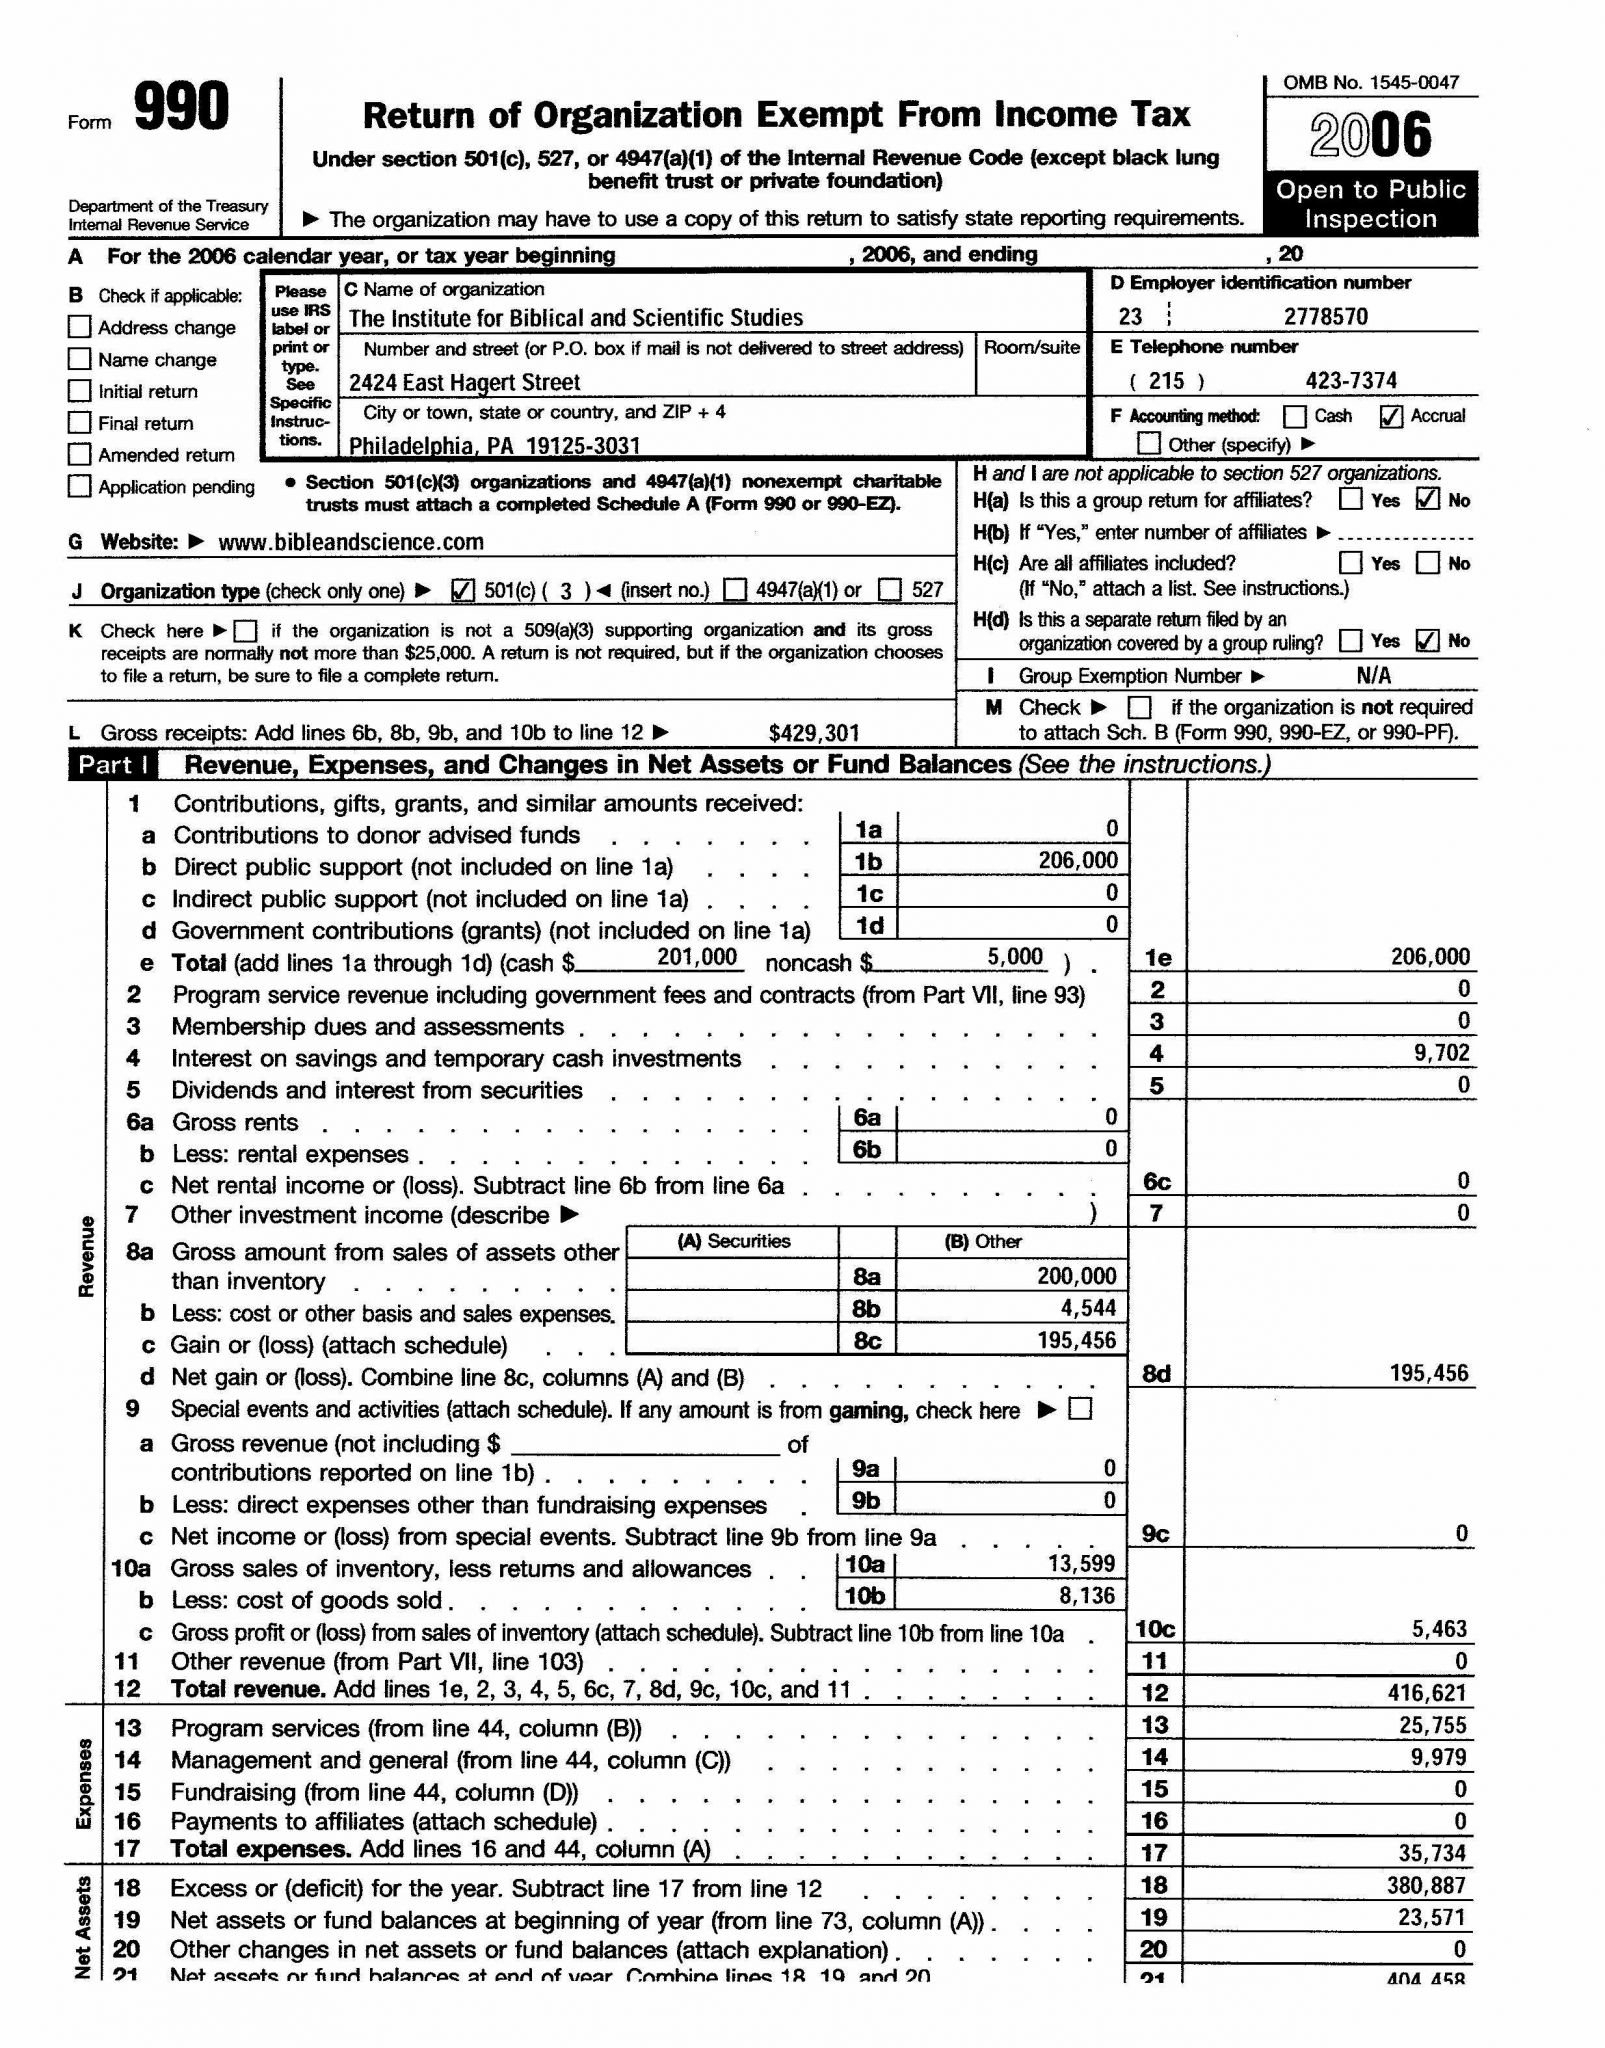 2017 Estimated Tax Worksheet  Briefencounters Pertaining To 2017 Estimated Tax Worksheet